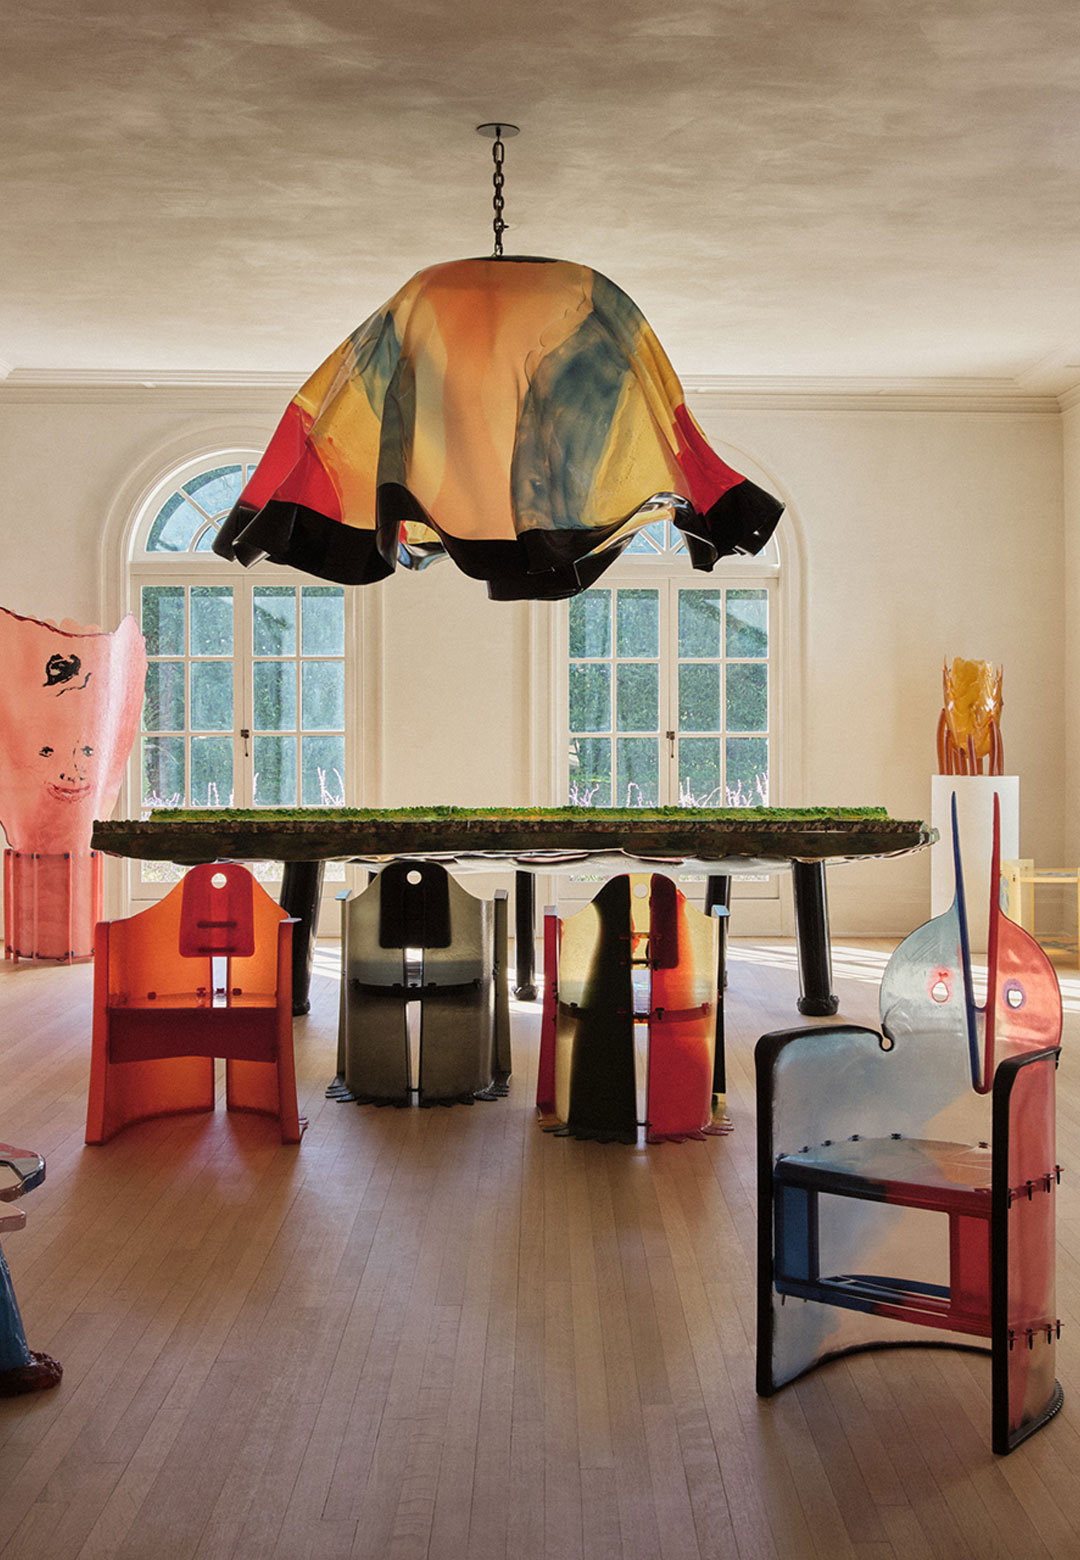 The Future Perfect brings Gaetano Pesce’s considered creative imperfections to LA